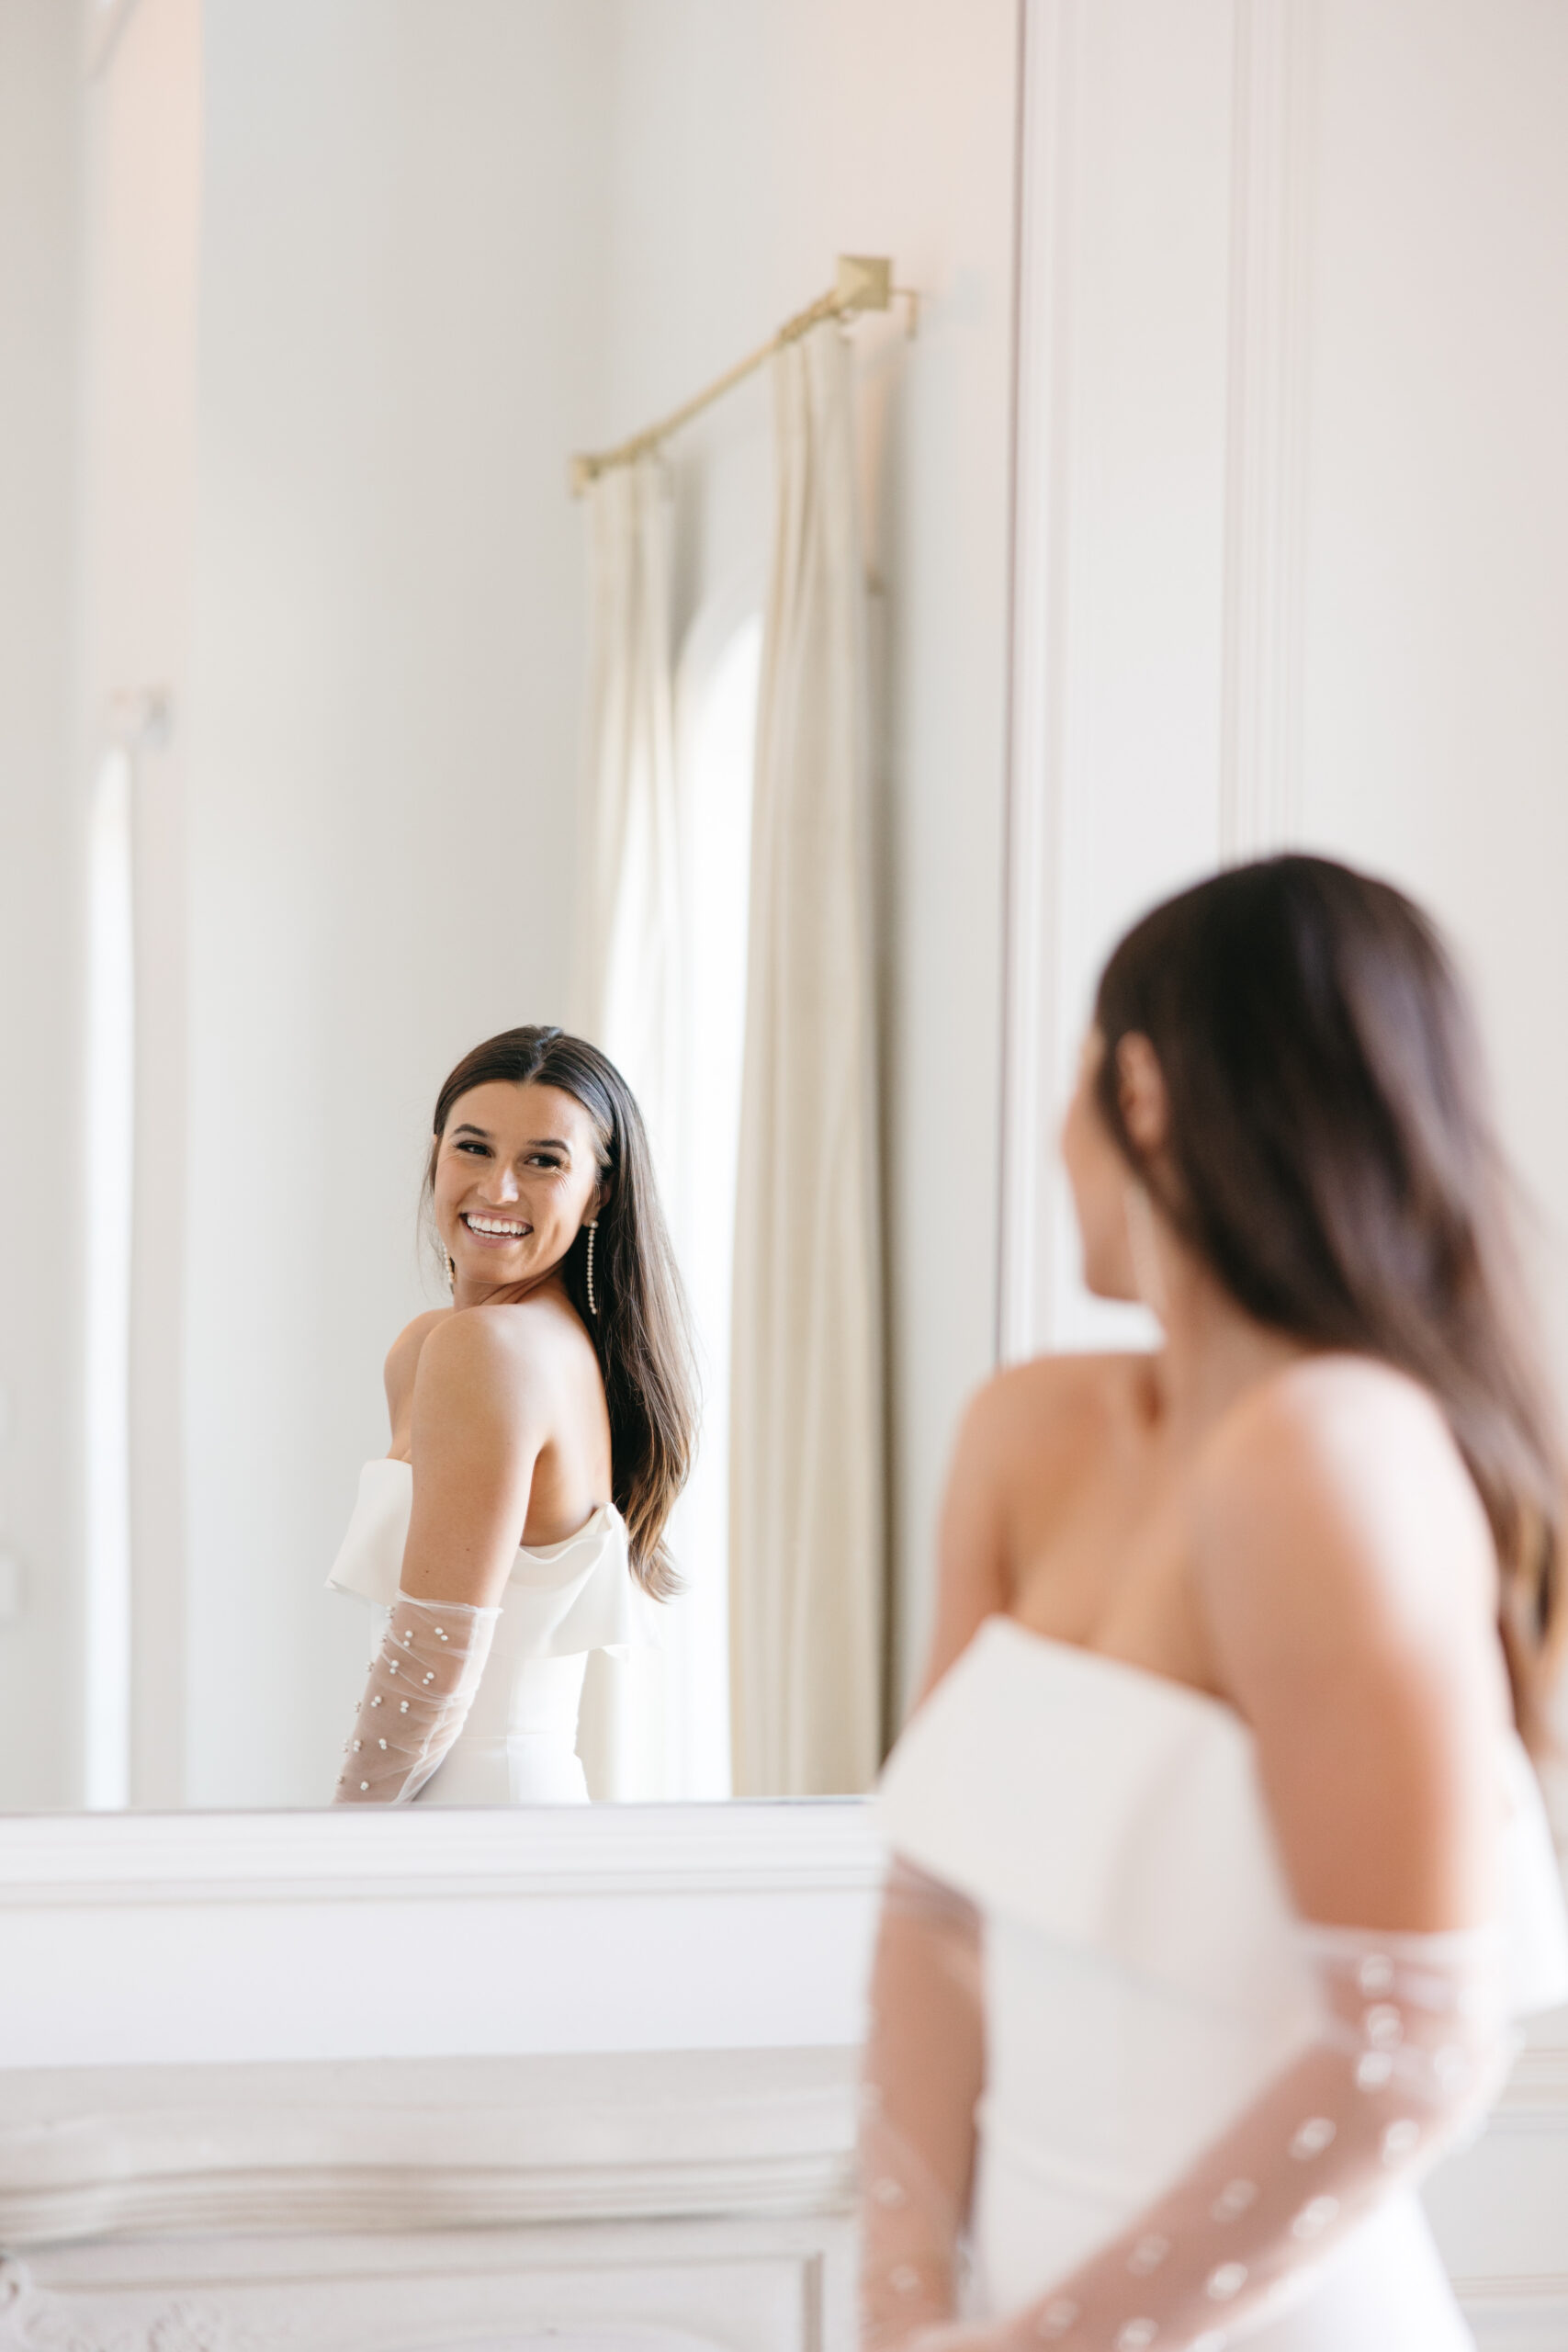 Kayla's Bridal session at The Hillside Estate in Dallas, Texas was one to remember. As a wedding planner herself, Kayla had a beautiful vision for this day.